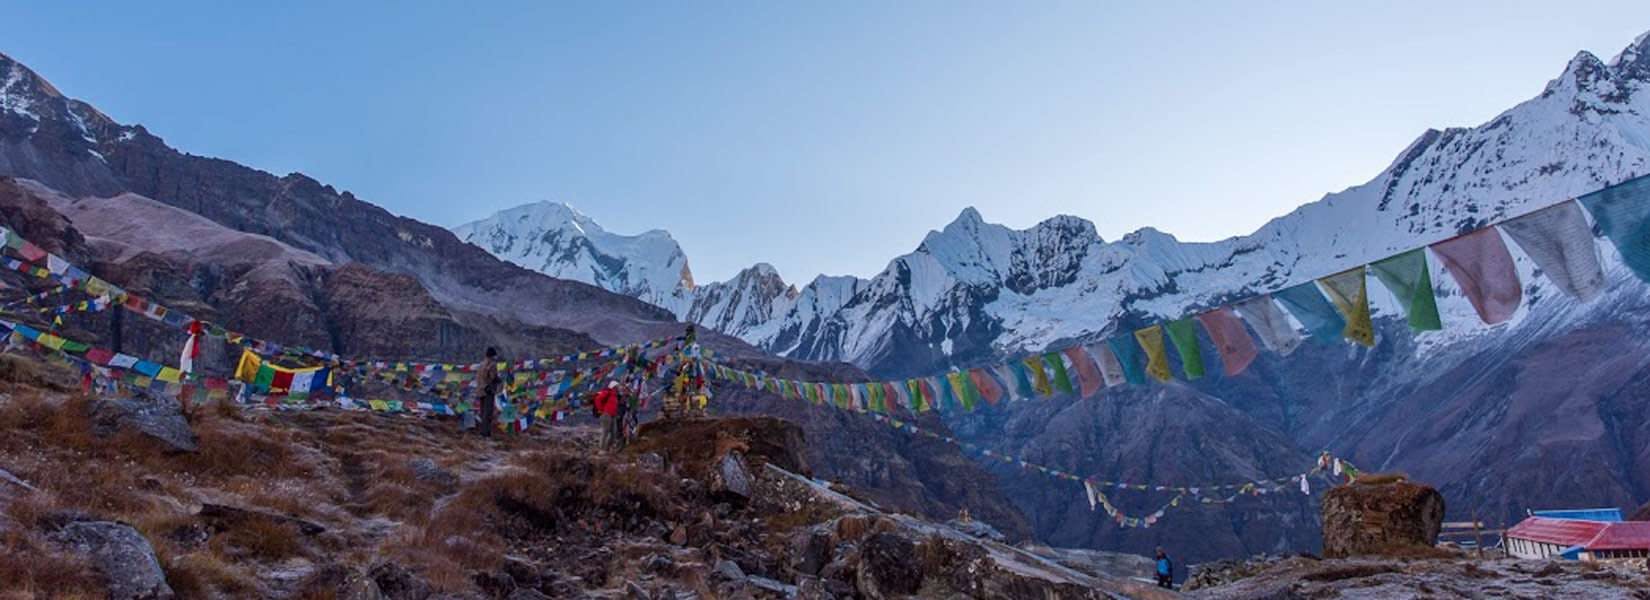 Best Trekking Routes and Regions in Nepal